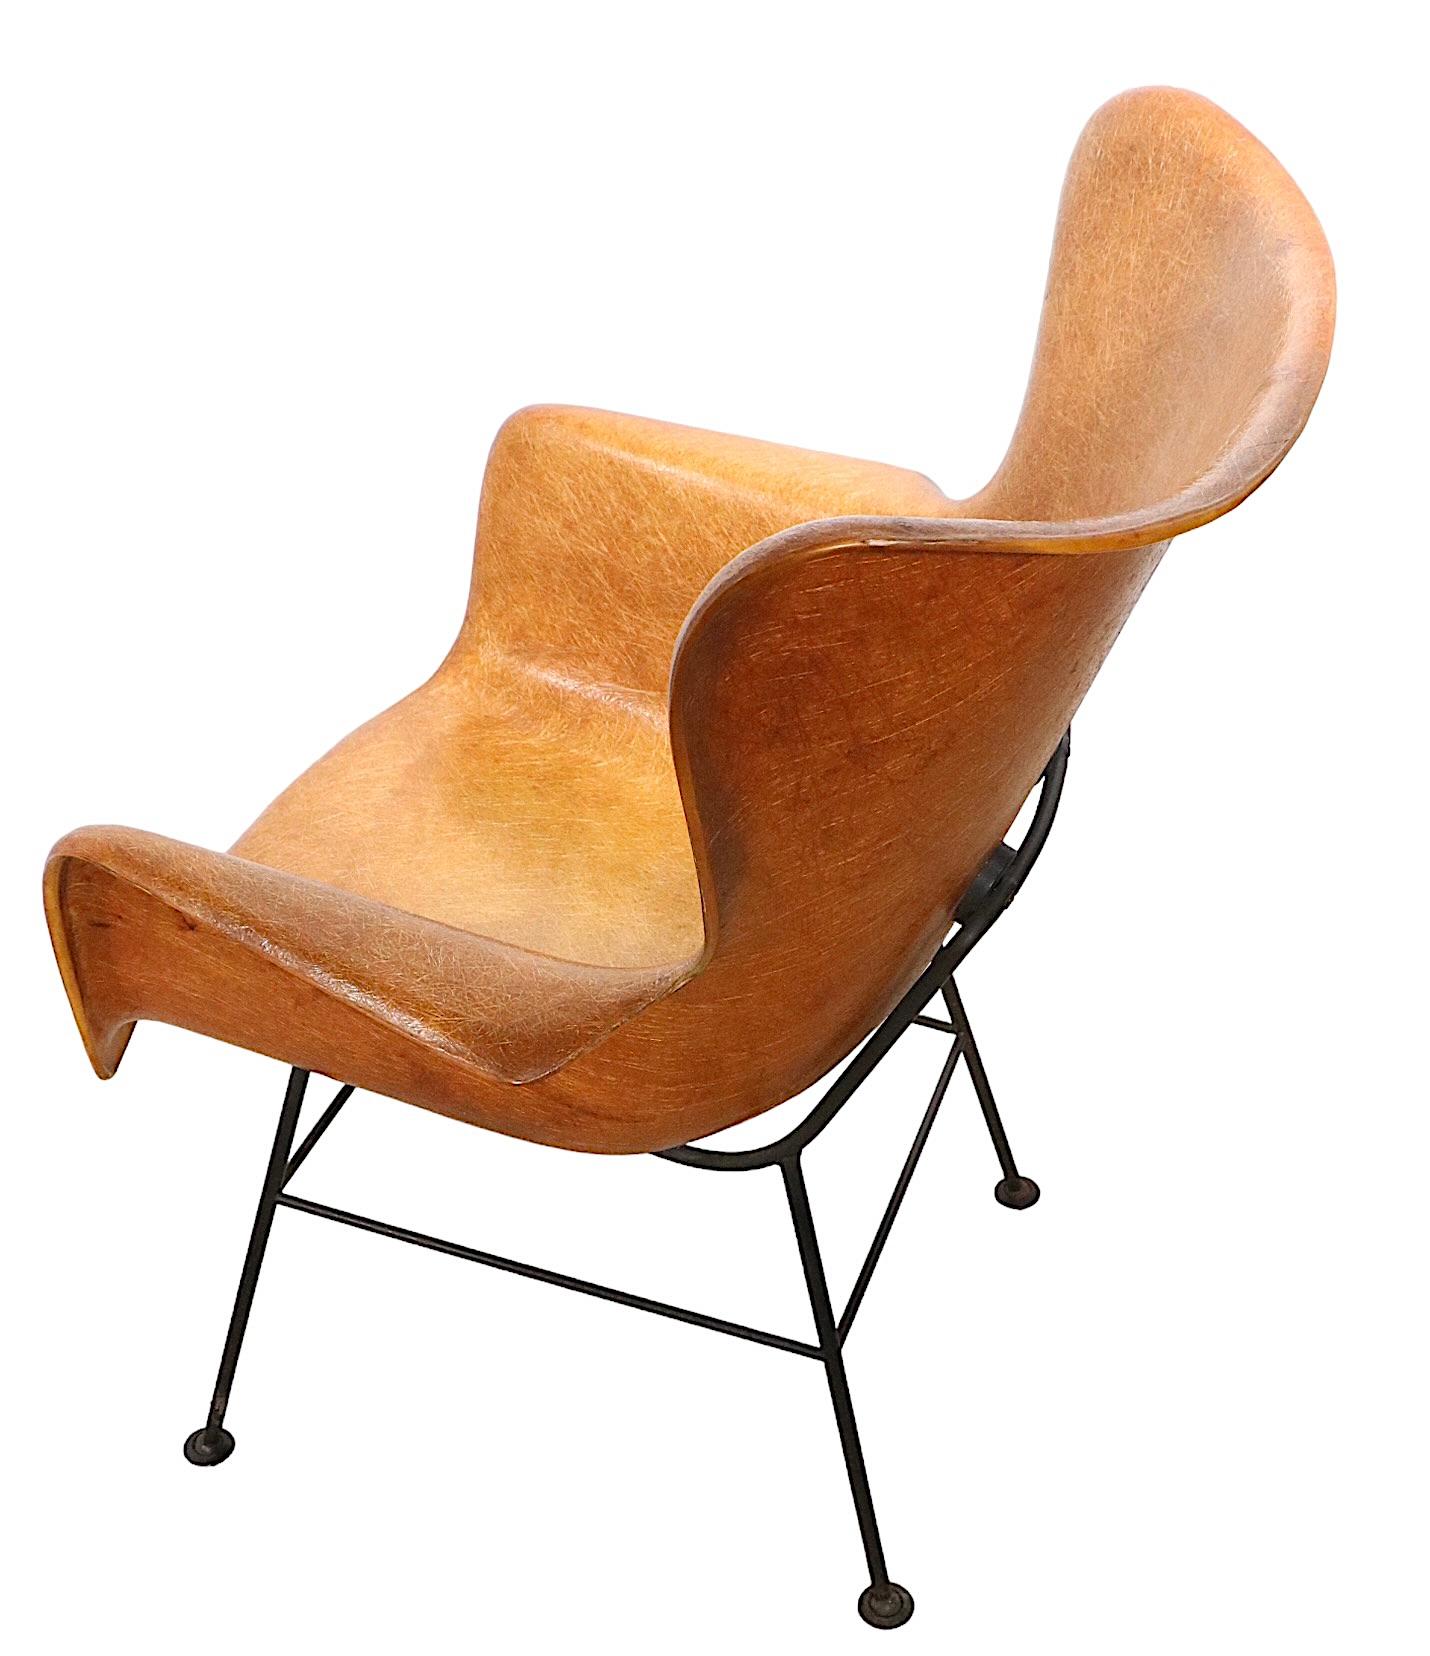 Mid-Century Modern Iconic Mid Century Fiberglass Wingback Chair by Peabody for Selig, circa 1950s For Sale